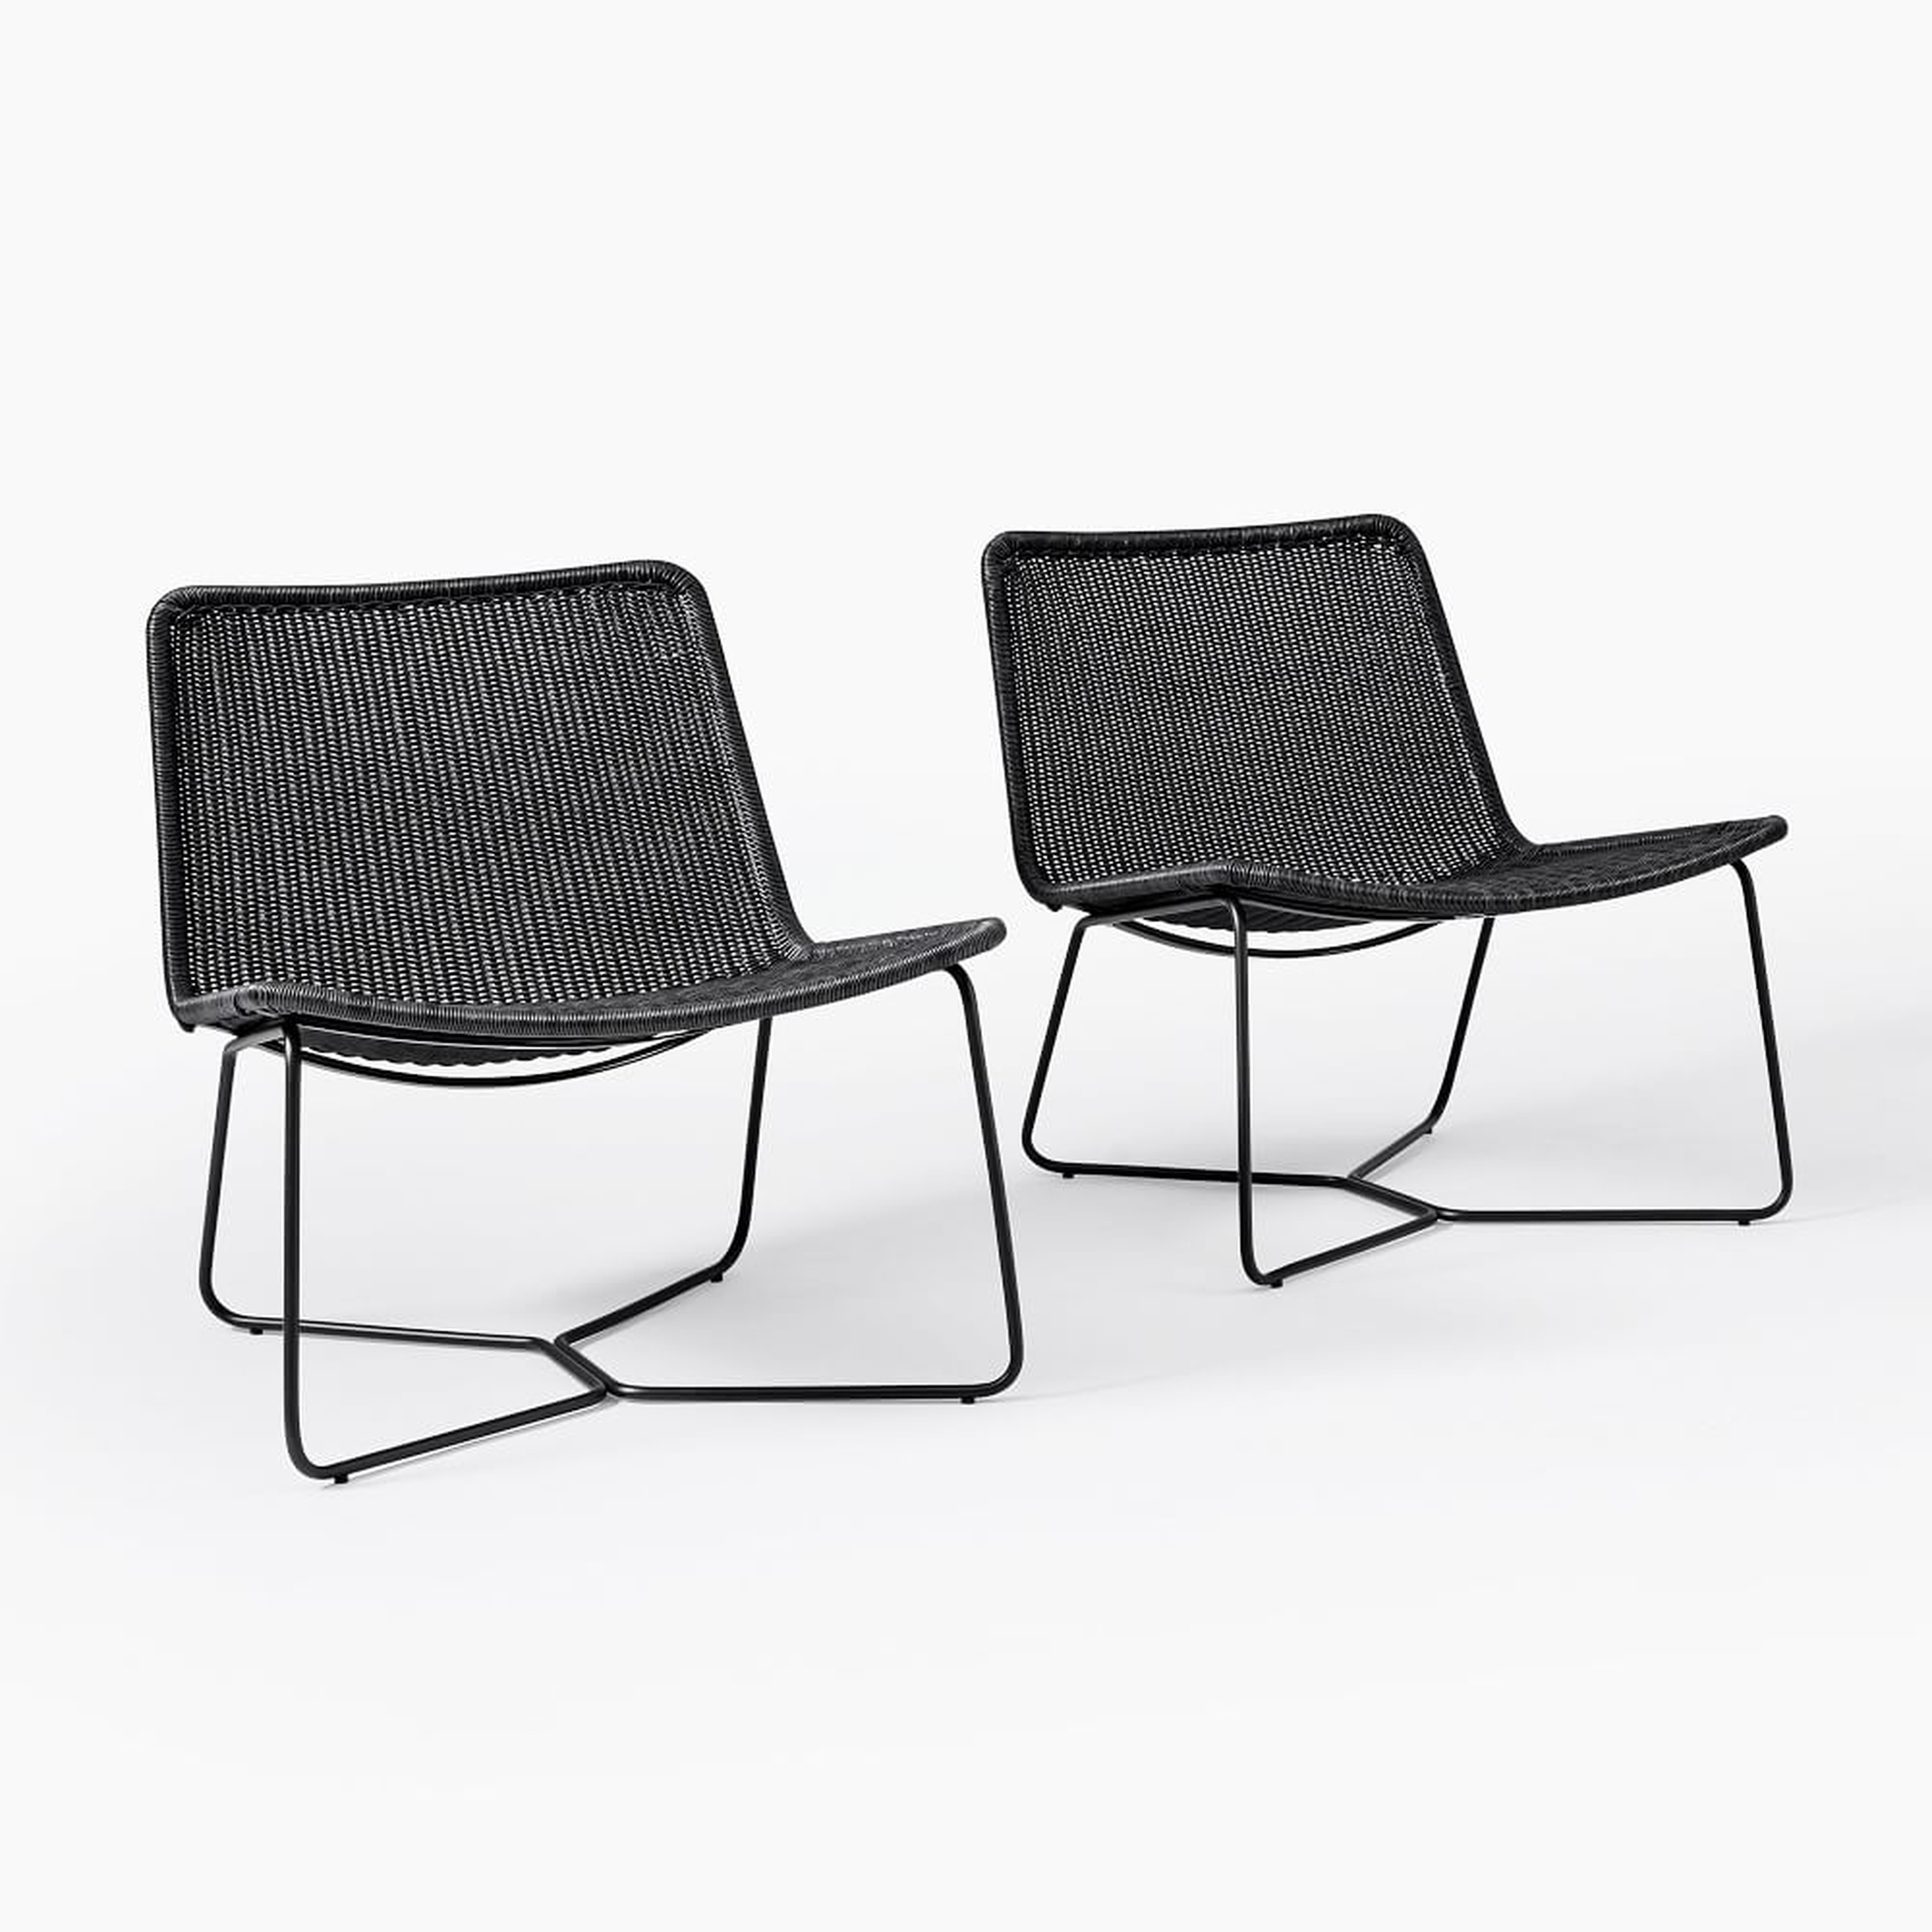 Slope Charcoal Lounge Chairs, Set of 2 - West Elm